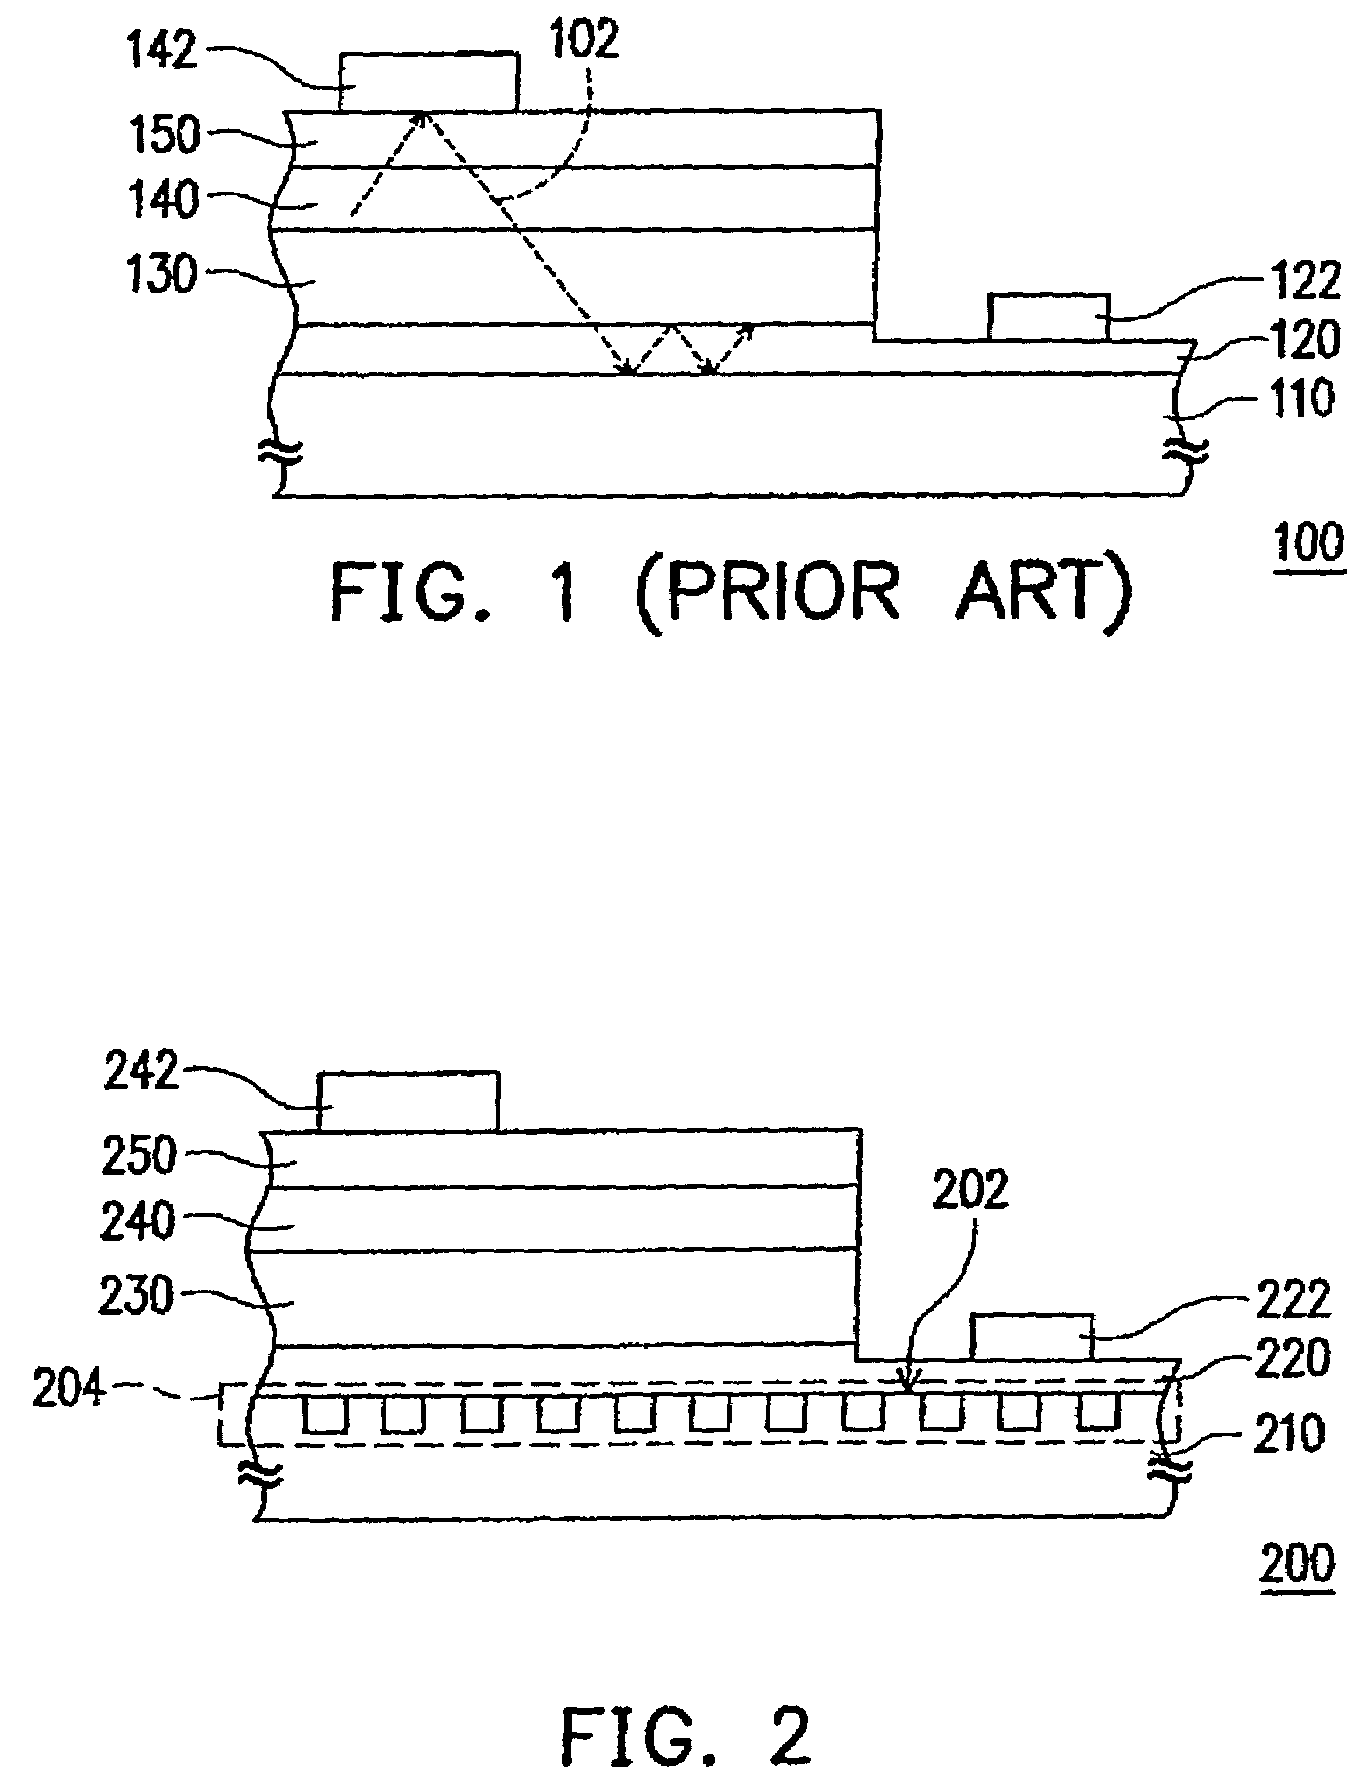 Light emitting diode structure having photonic crystals